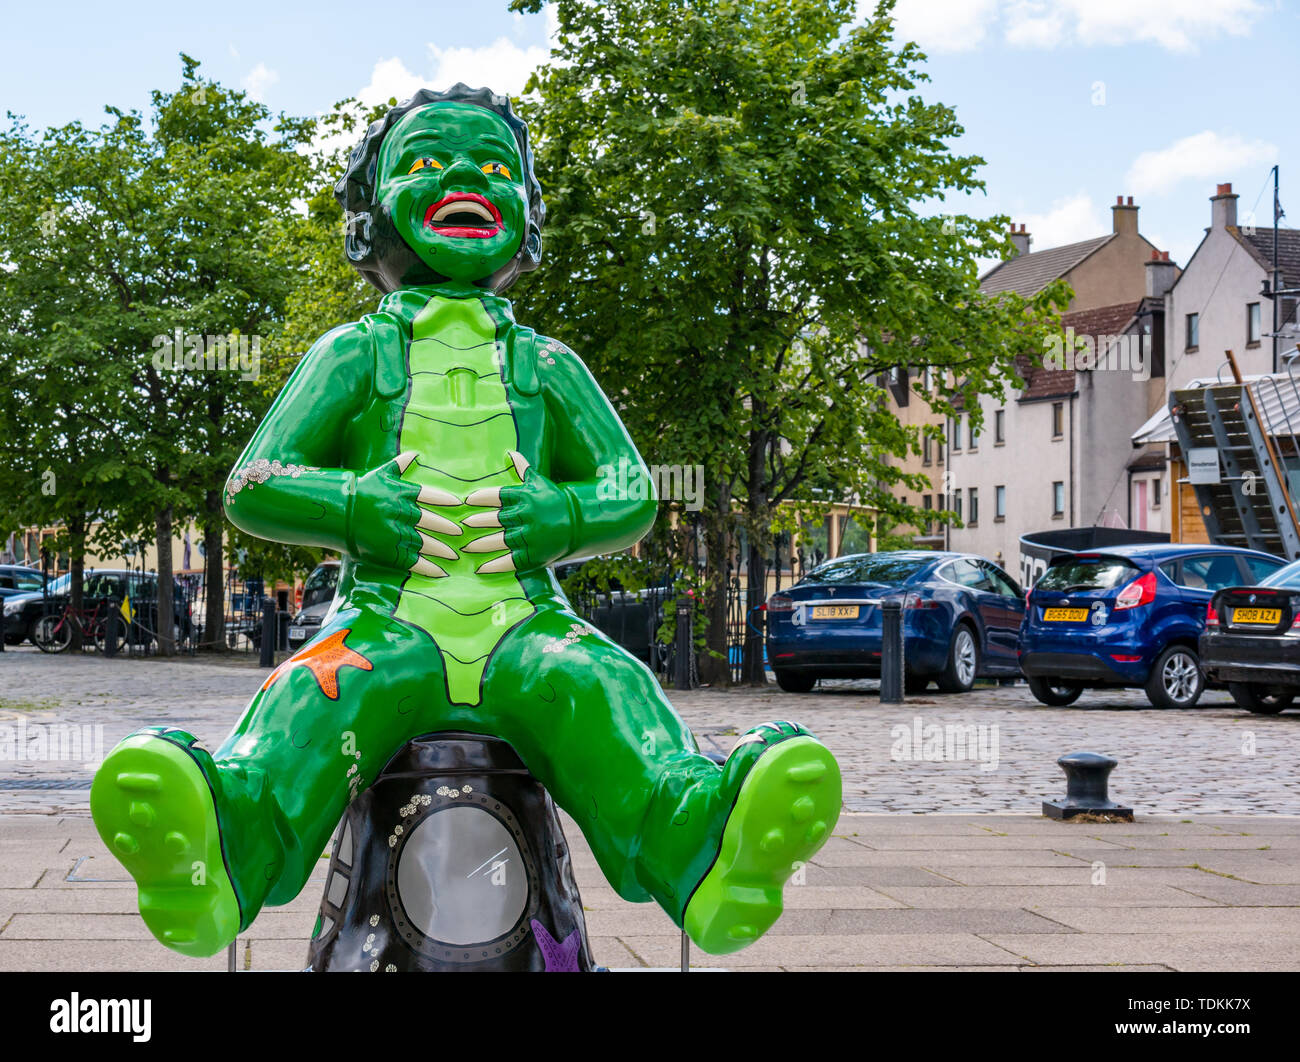 Leith, Edinburgh, Scotland, United Kingdom, 17 June 2019. Oor Wullie's Big Bucket Trail: An art trail of 200 Oor Wullie sculptures appear in Scottish cities in a mass arts event that lasts until August 30th. Oor Wullie is an iconic Scottish cartoon character from the Sunday Post newspaper. The sculptures will be auctioned to raise money for Scotland’s children’s hospital charities There are 5 in the Leith area, and 60 in Edinburgh altogether. Wullie from the Black Lagoon by Ruairidh Brunton Stock Photo